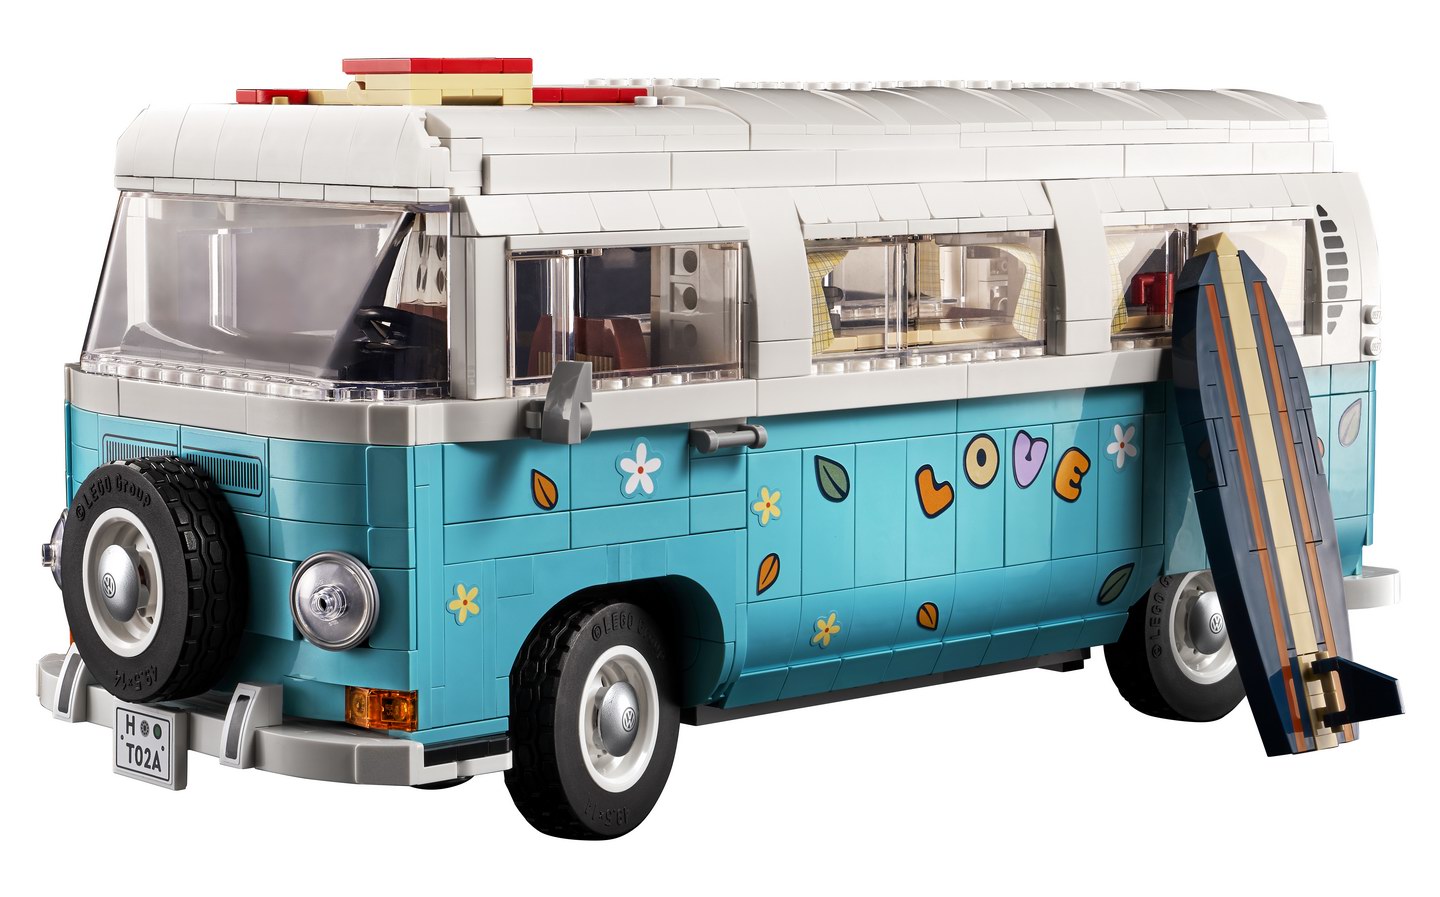 Lego launches 2,200+ piece VW Camper kit